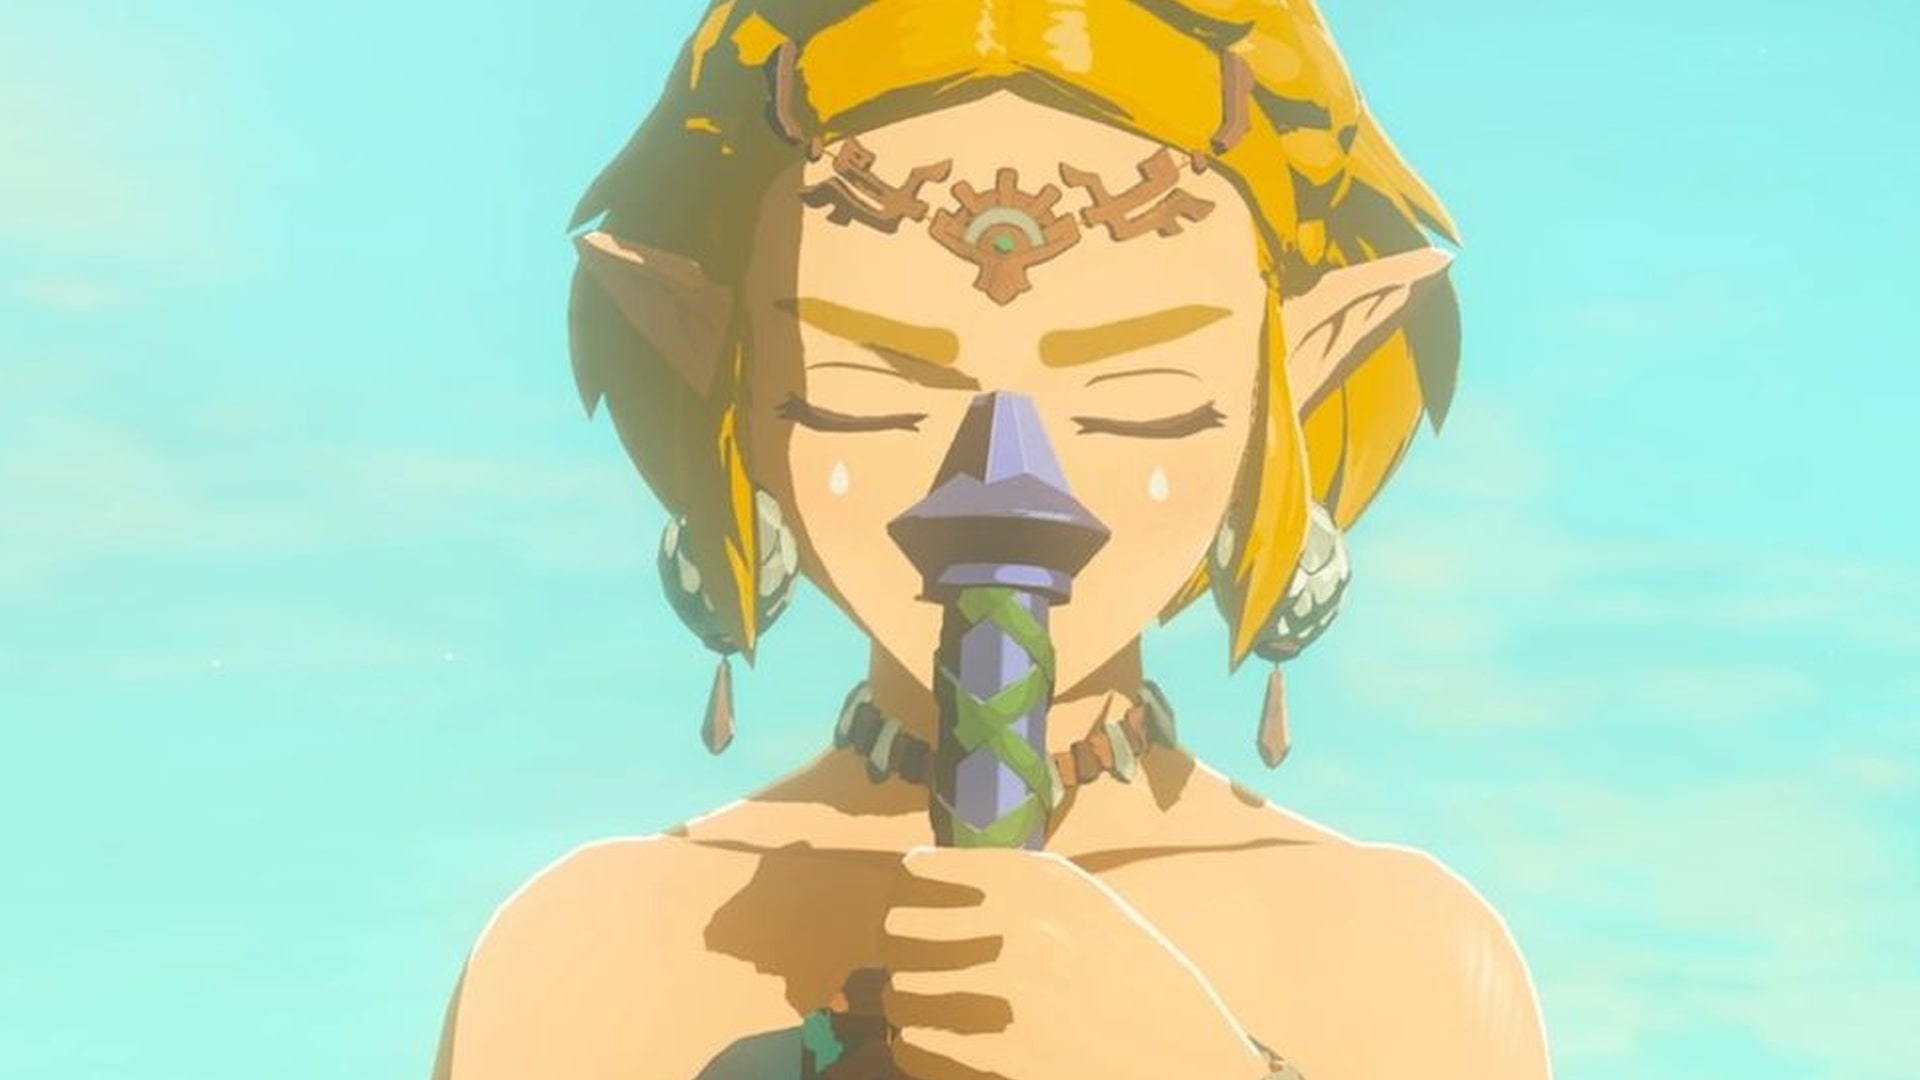 Latest Zelda Game Highlights in Gamers News Roundup